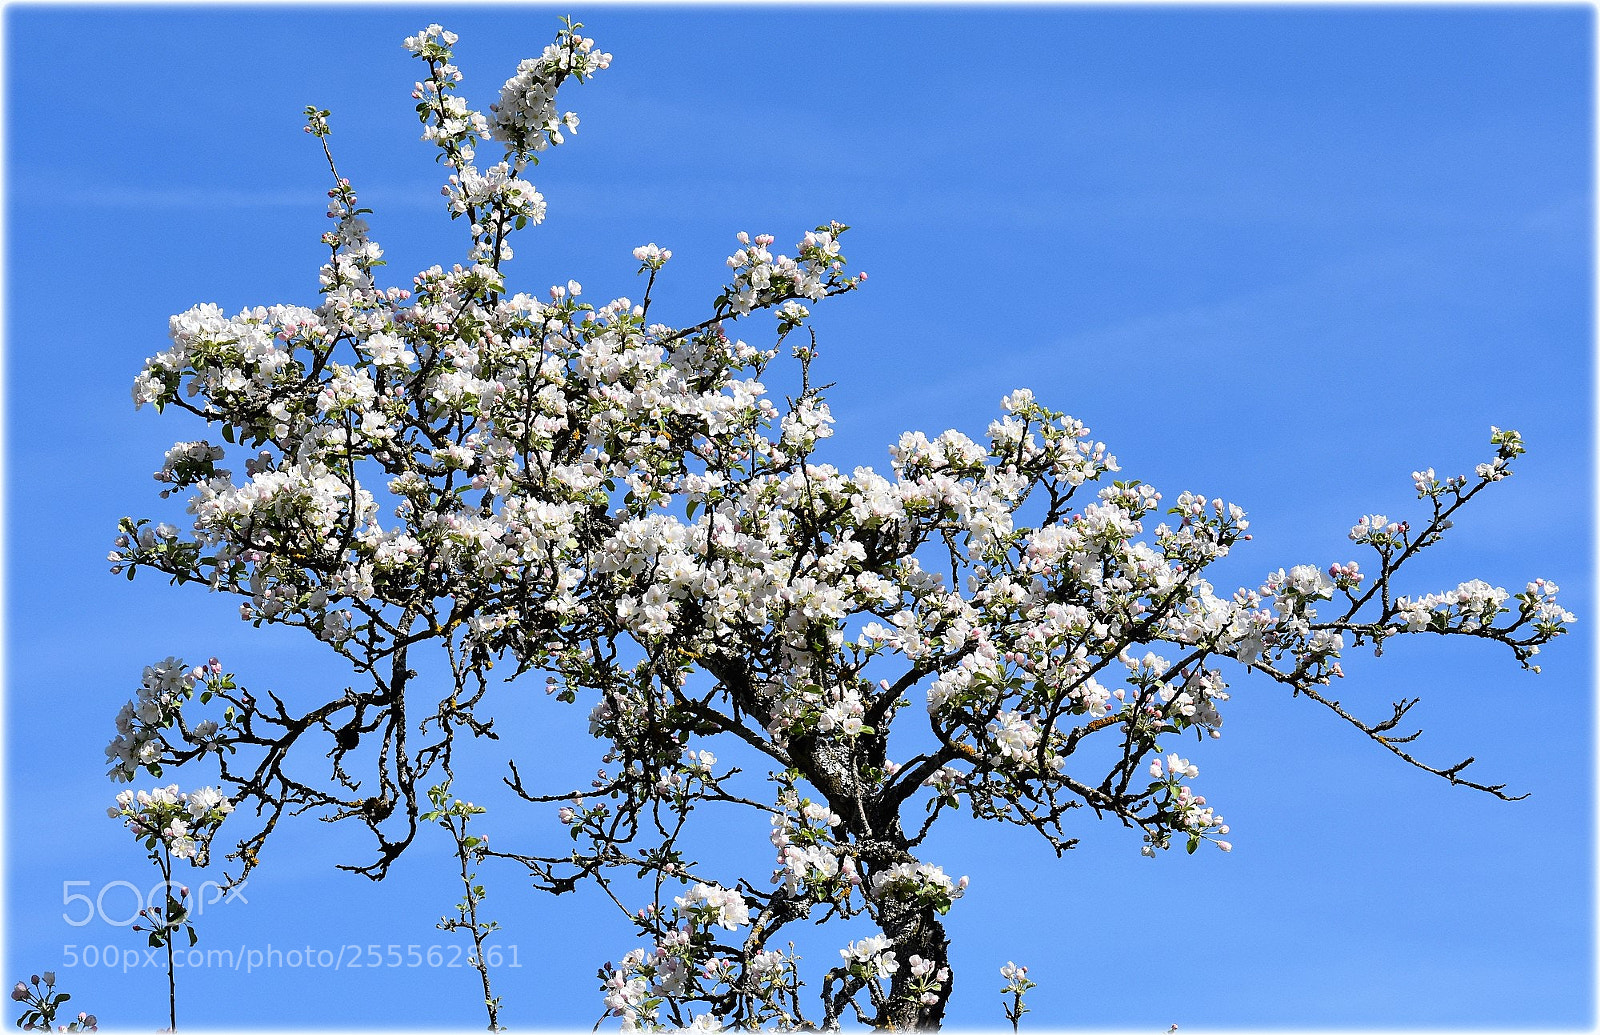 Nikon D7200 sample photo. "blossom in the sky" photography